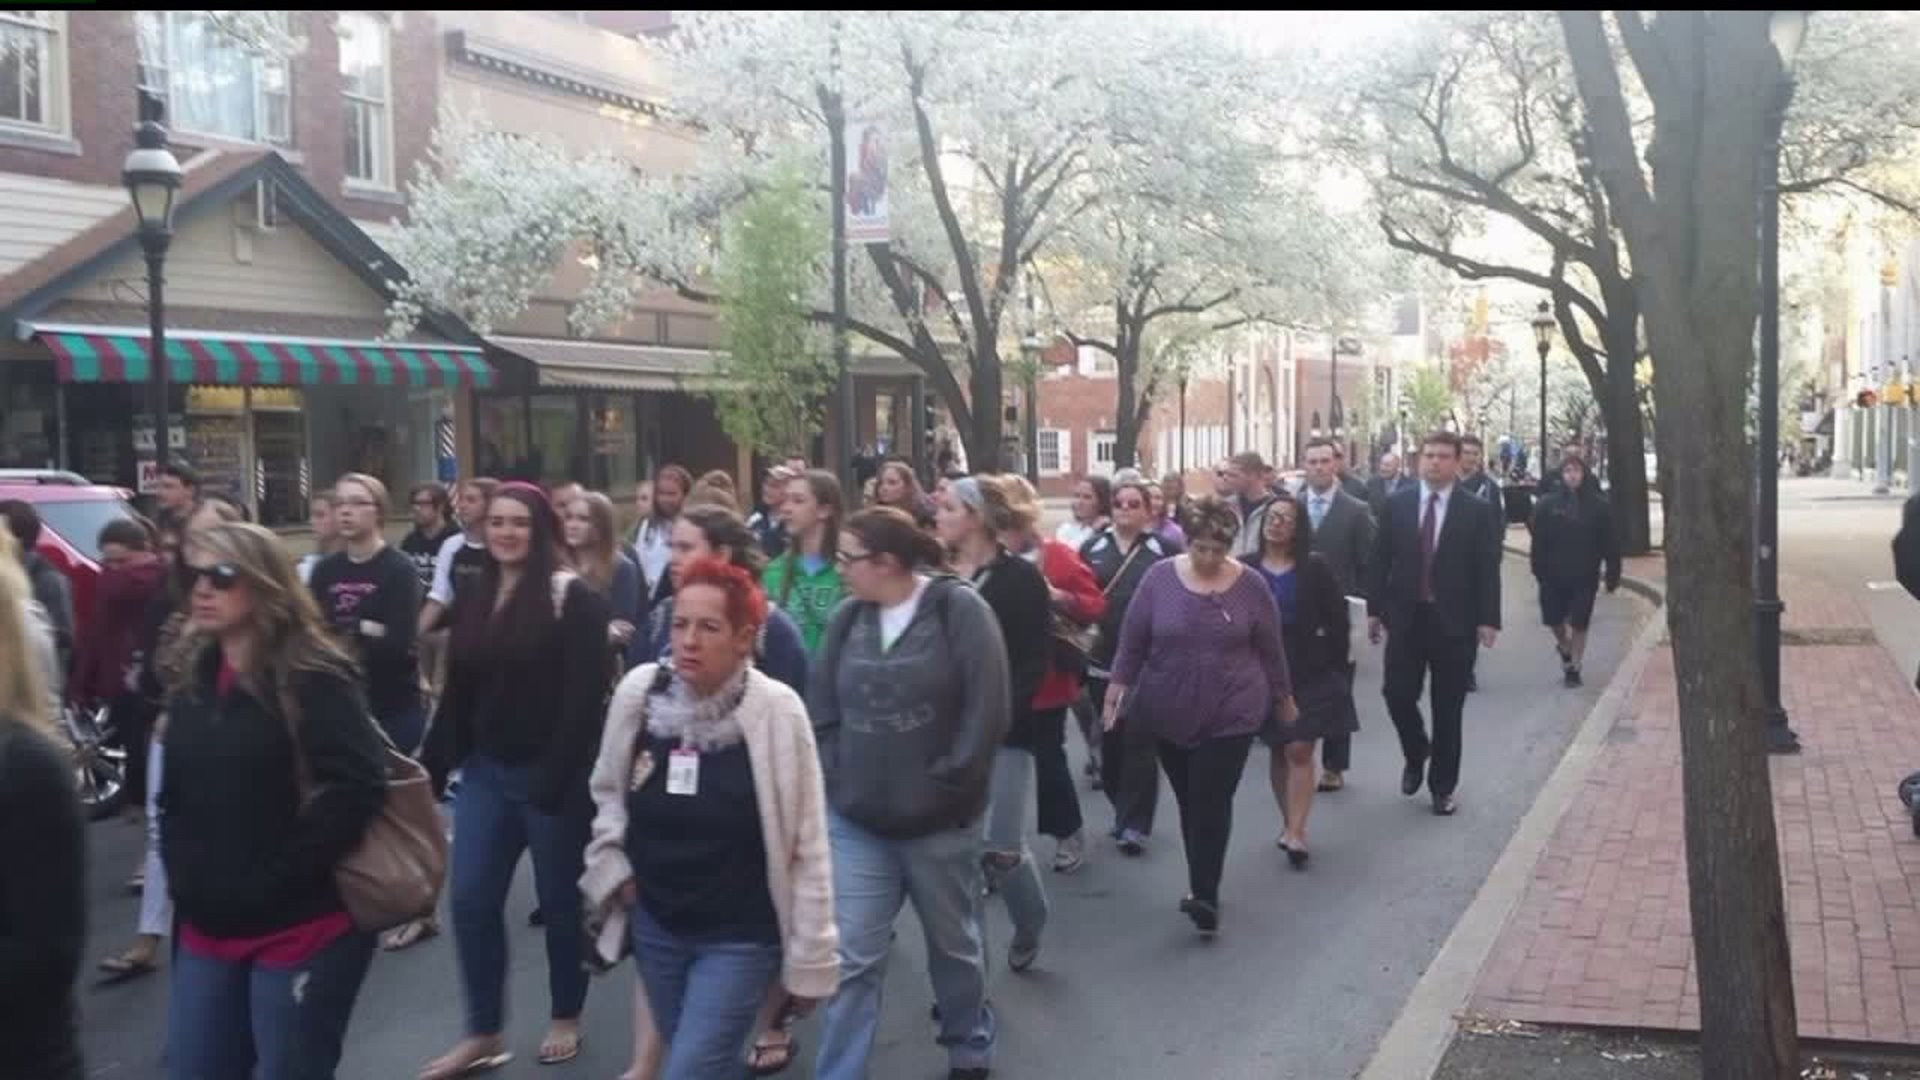 33rd Annual Crime Victims` Rights March and Candlelight Vigil set for Tuesday in York